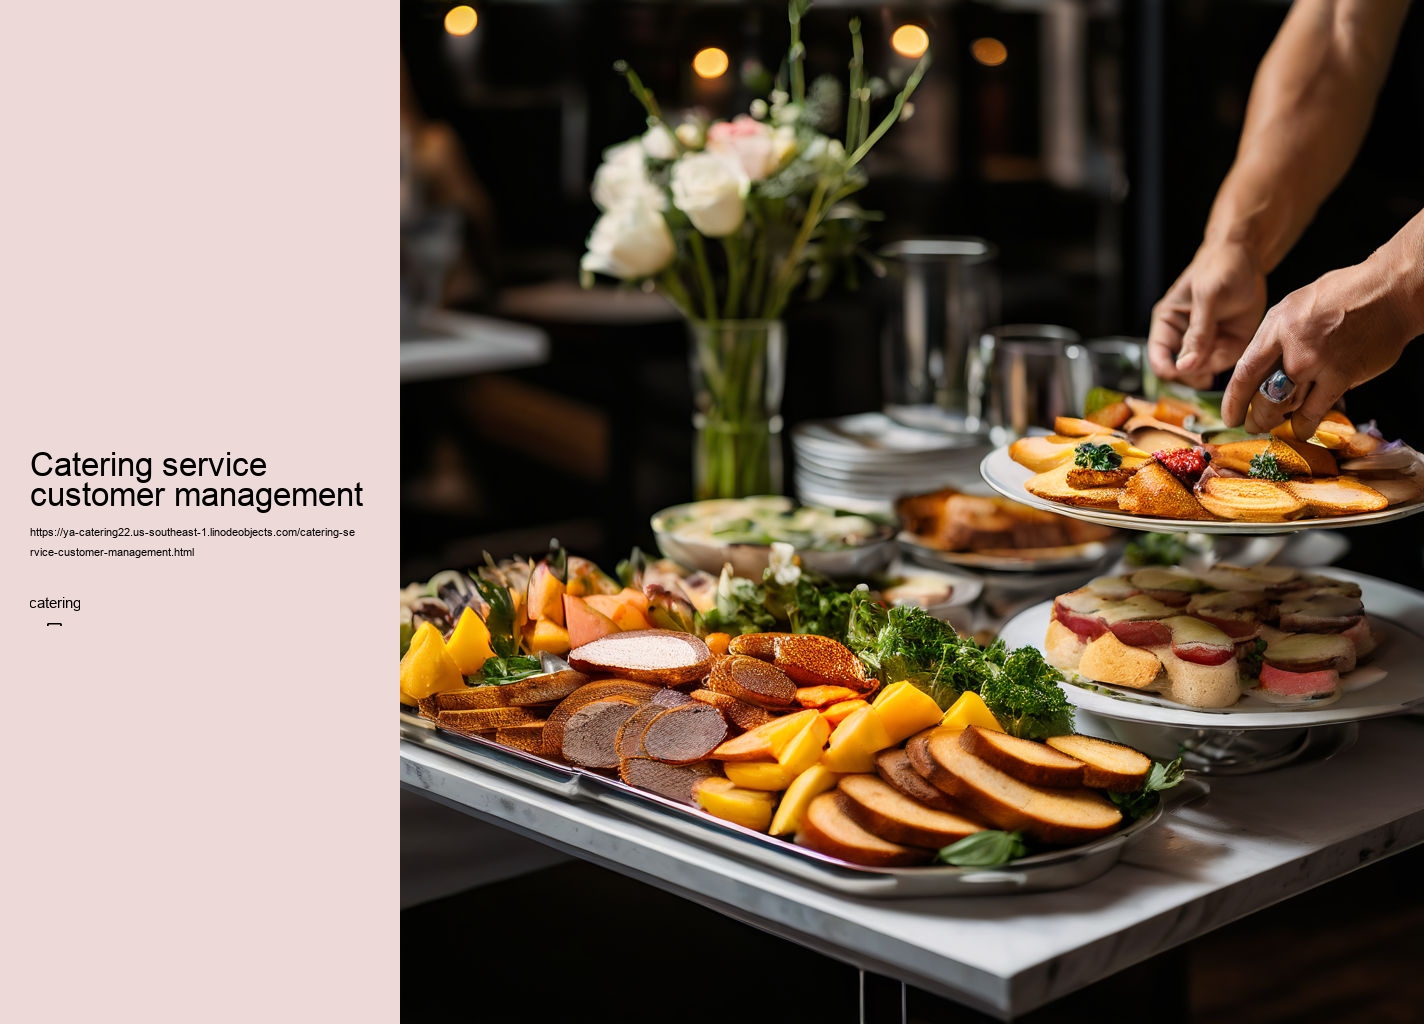 Catering service customer management